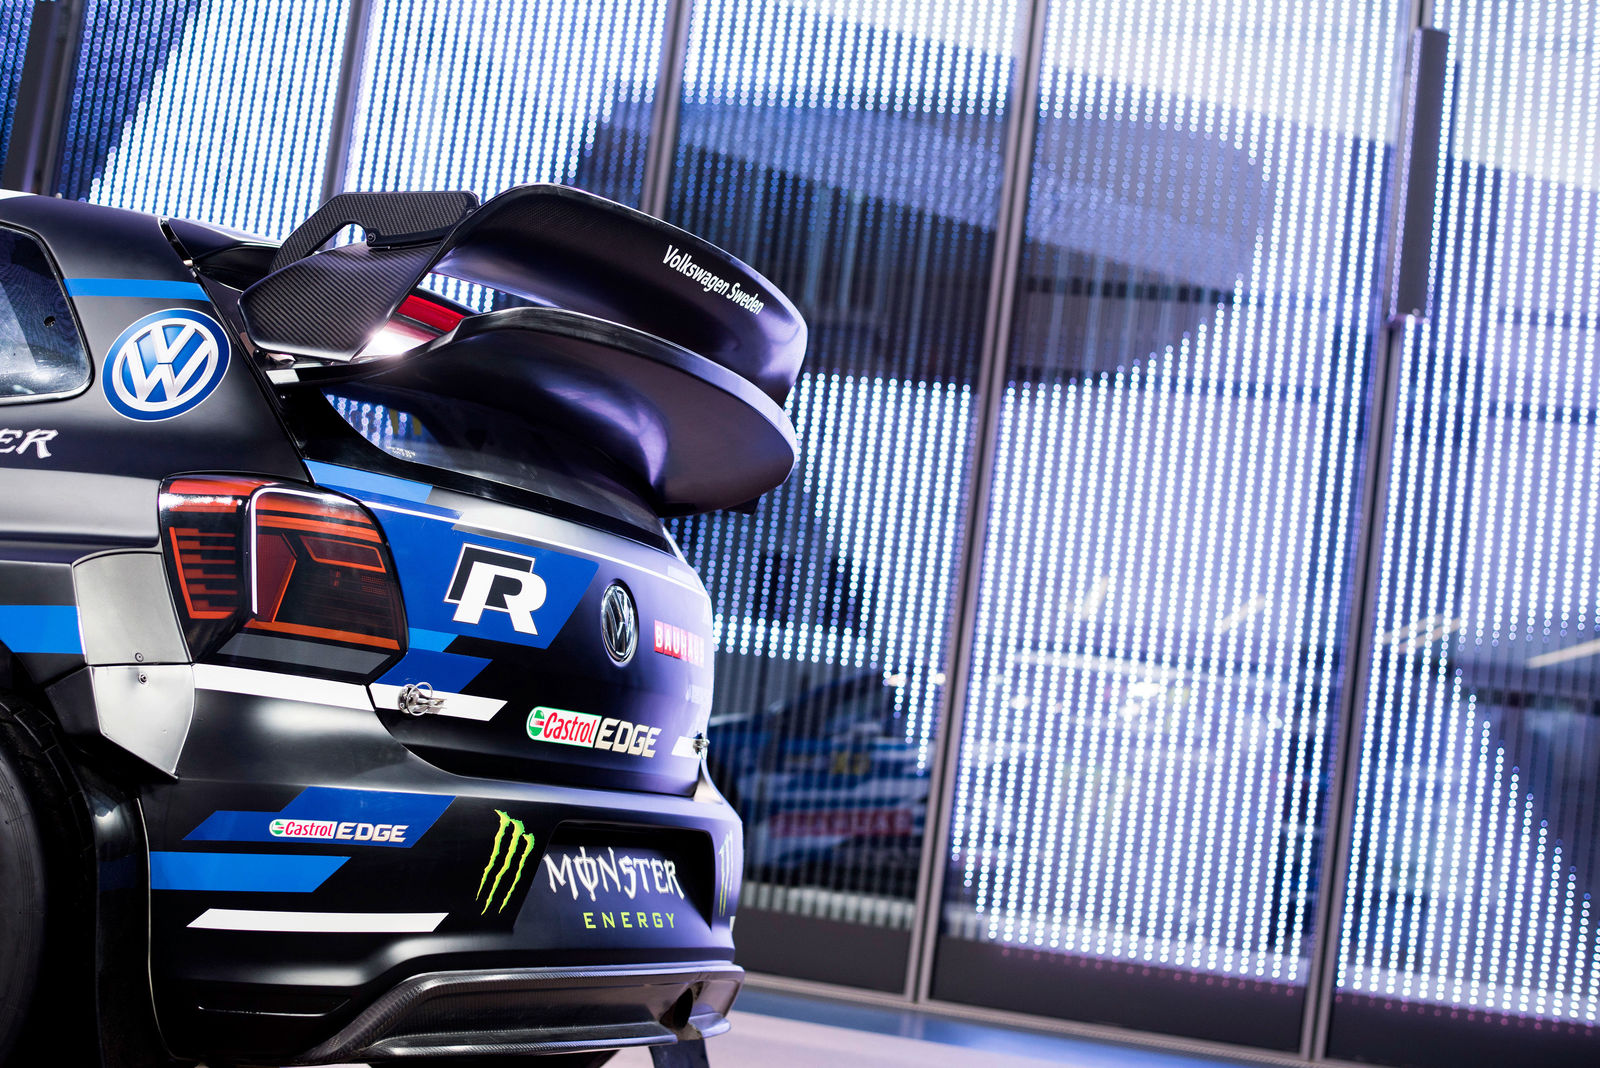 The new Polo R Supercar for the FIA World Rallycross Championship